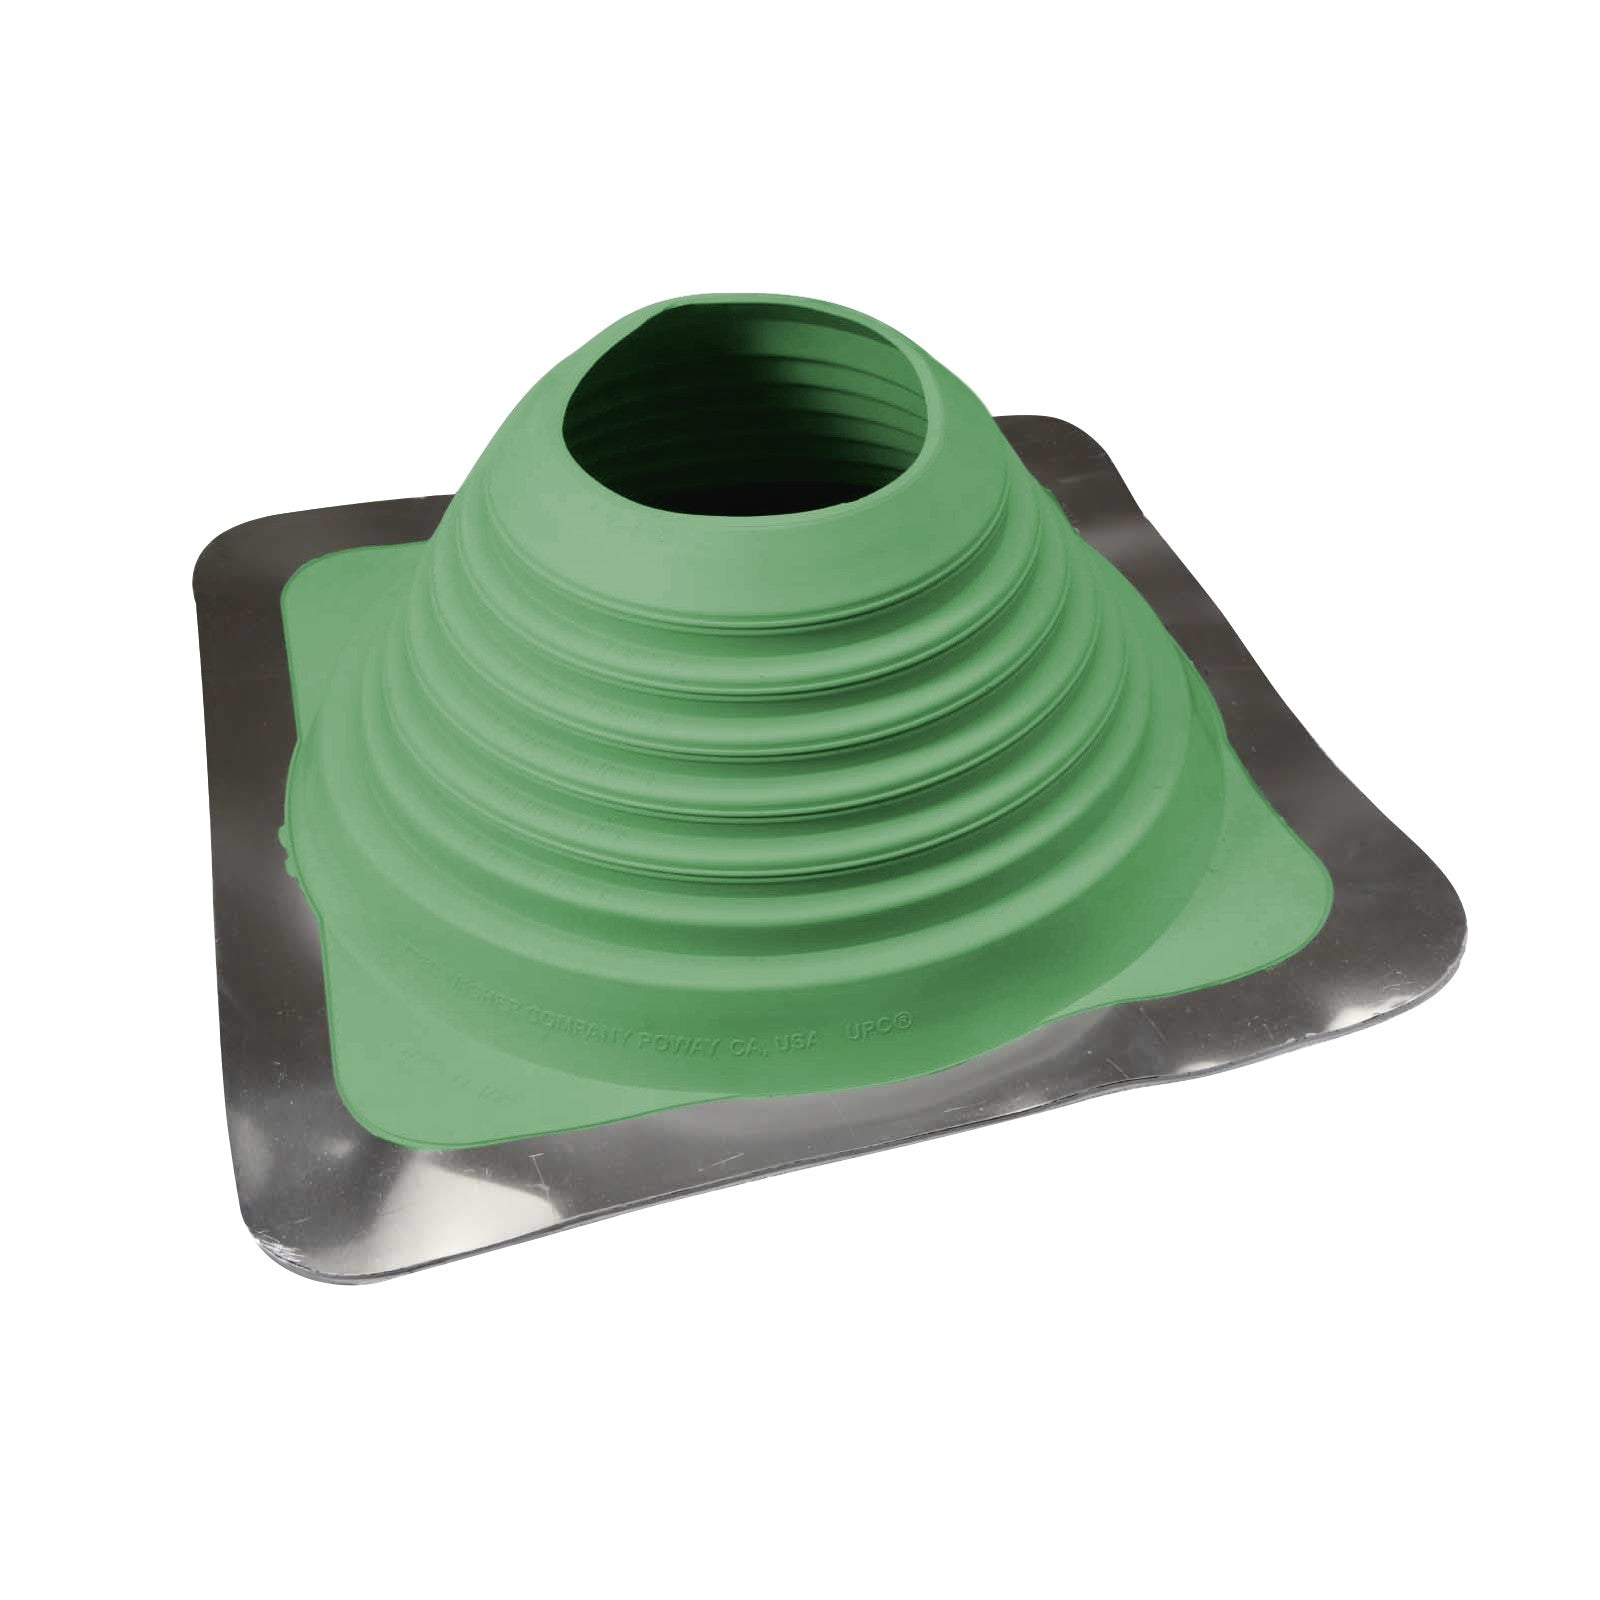 #7 Roofjack Square EPDM Pipe Flashing Boot Light Green